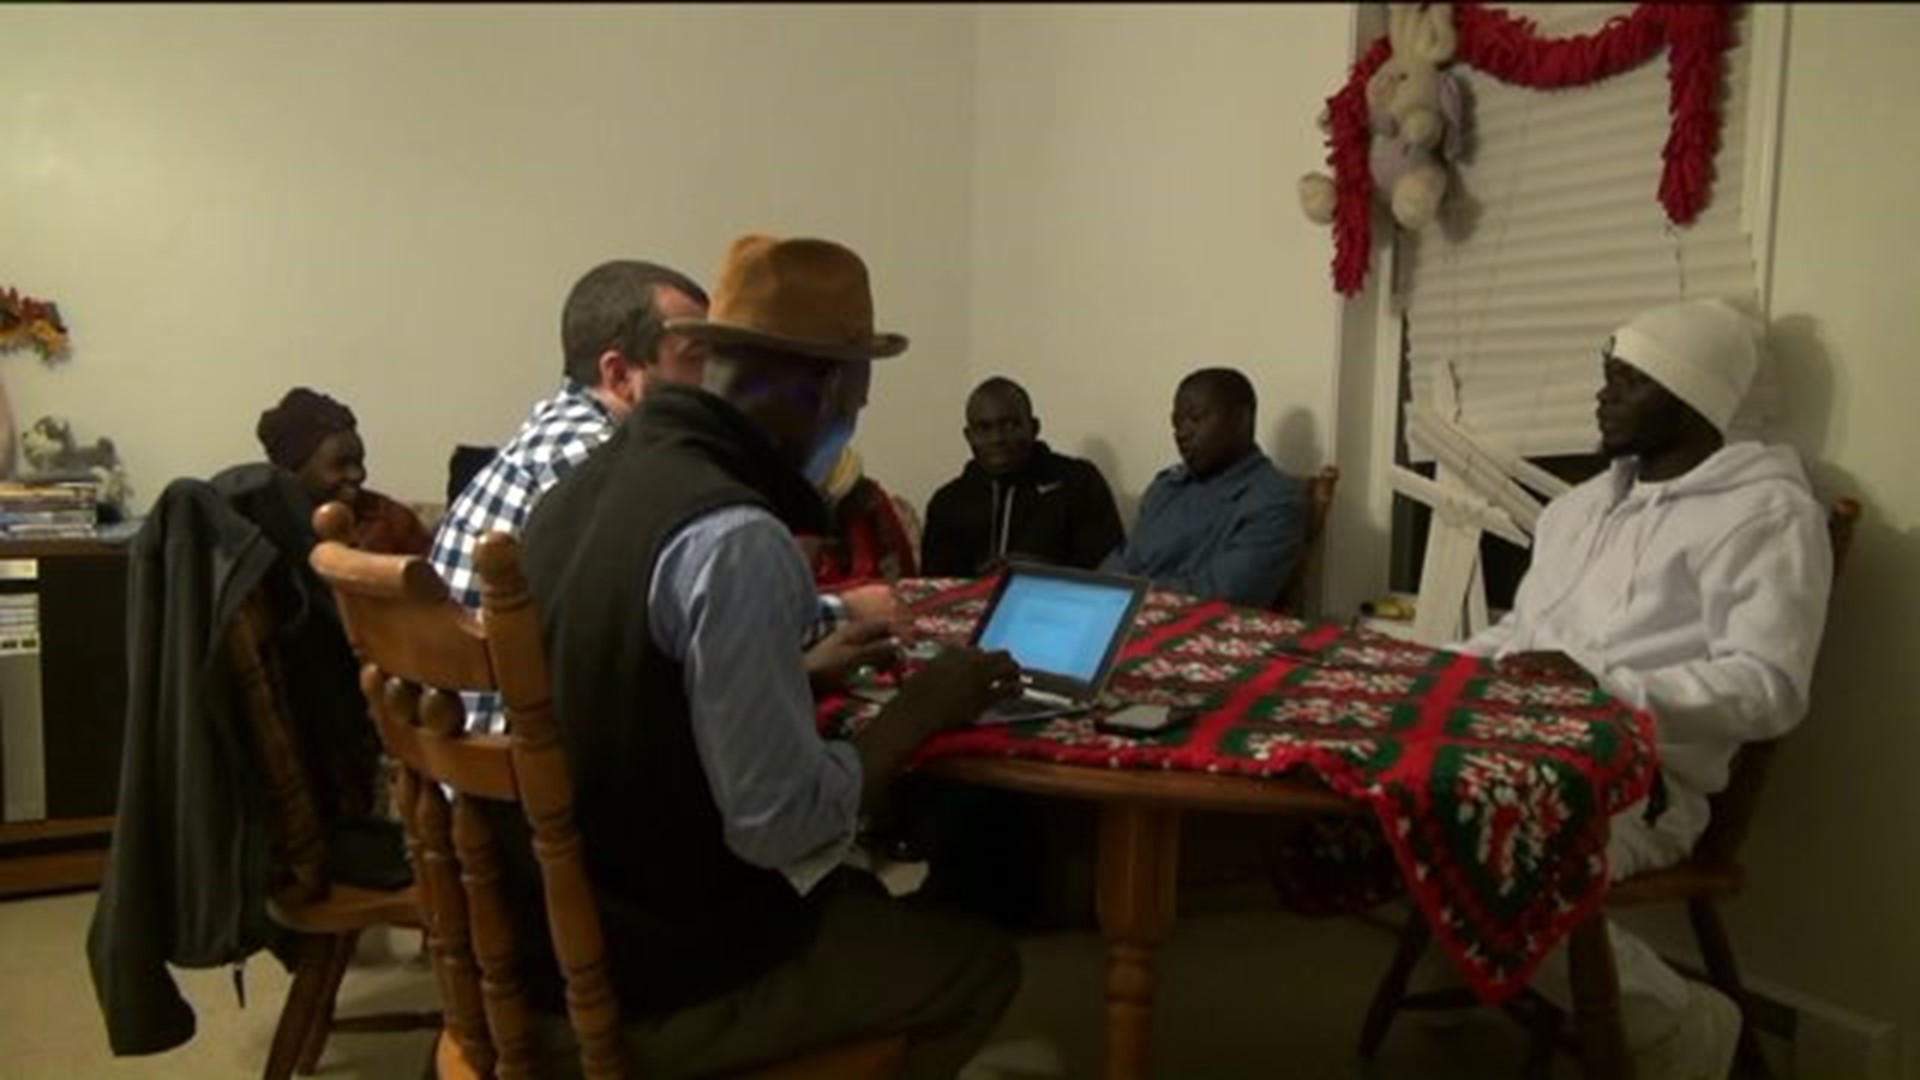 Scranton Church Looks to Help Refugees During Winter